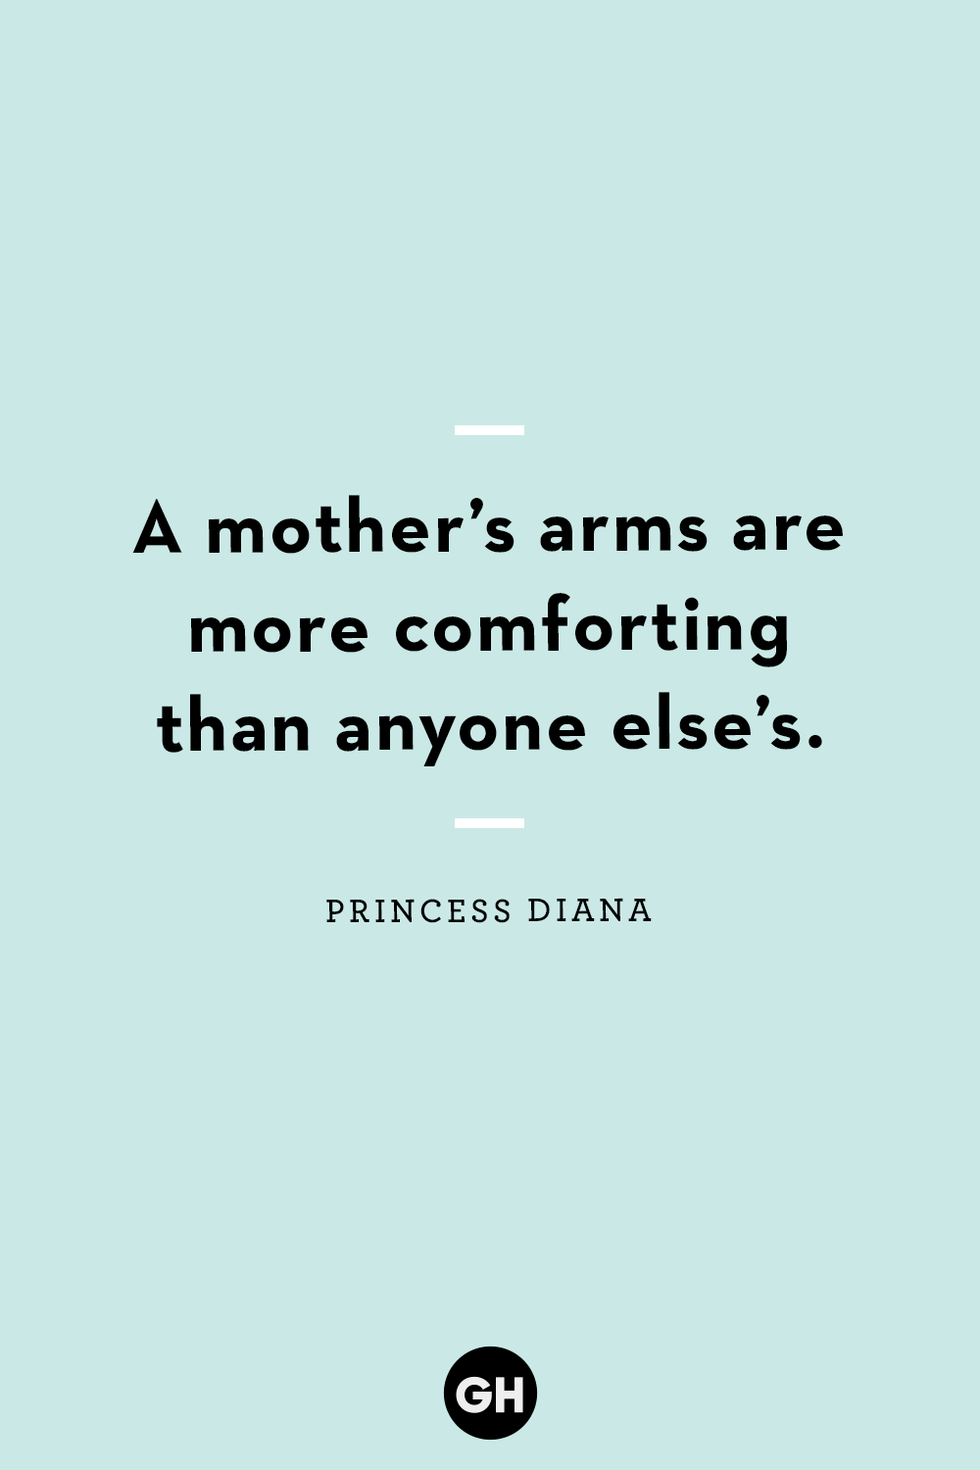 https://hips.hearstapps.com/hmg-prod/images/new-mom-quotes-princess-diana-64d2529d2a47a.png?crop=1xw:1xh;center,top&resize=980:*